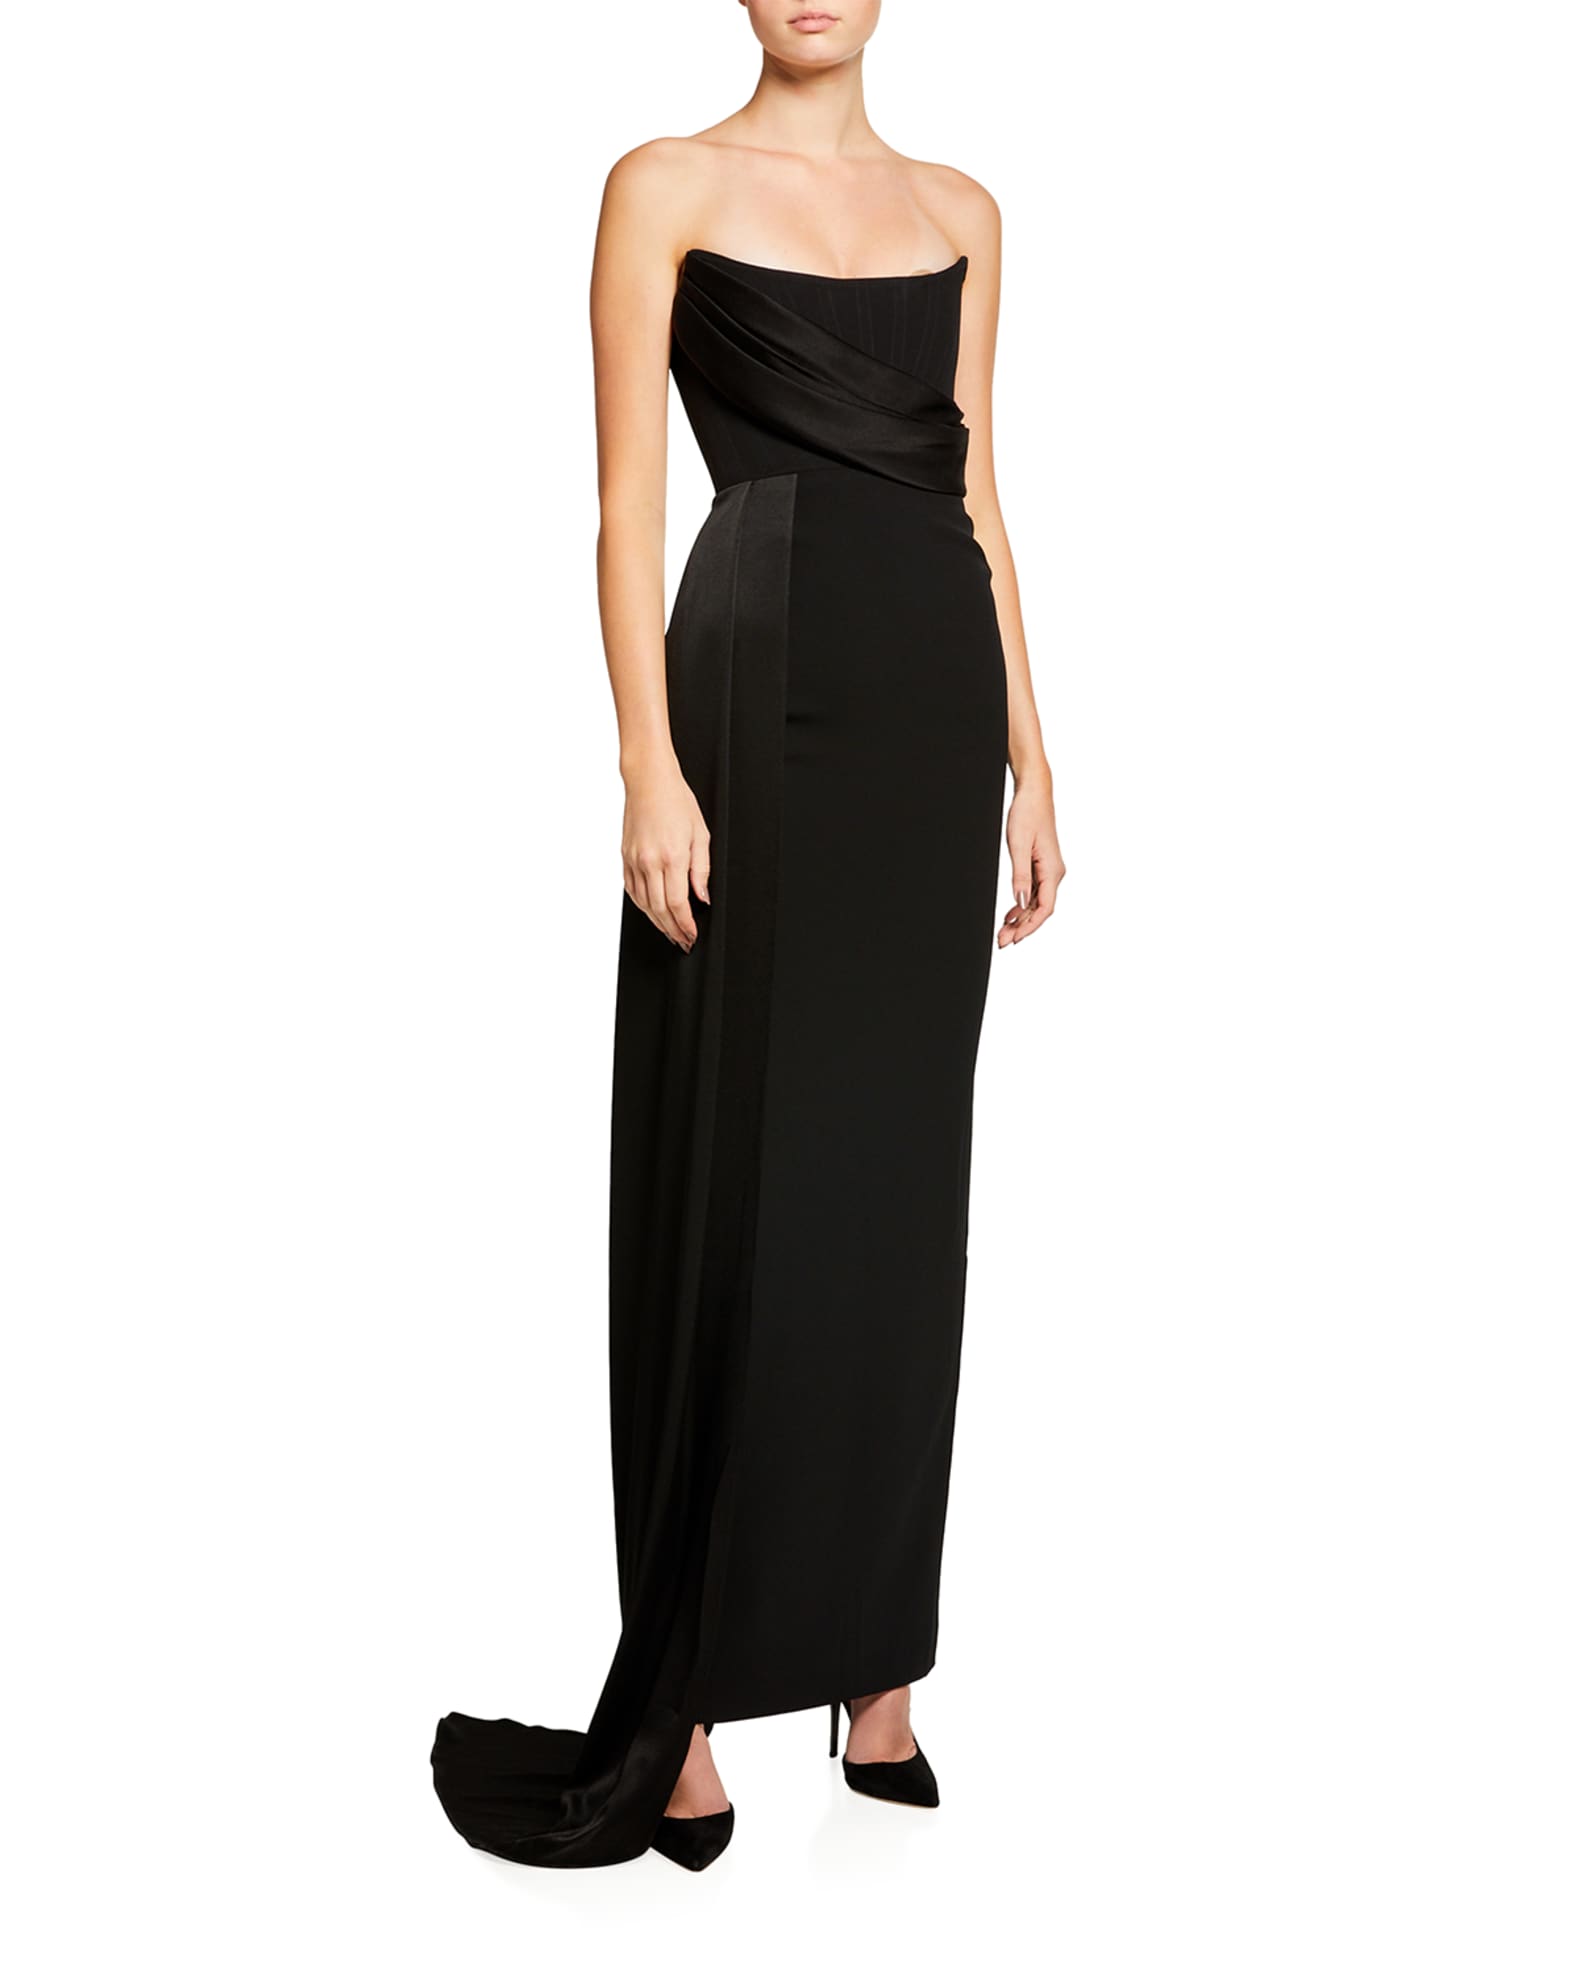 Alex Perry Kirby Strapless Crepe Column Draped Gown | Neiman Marcus